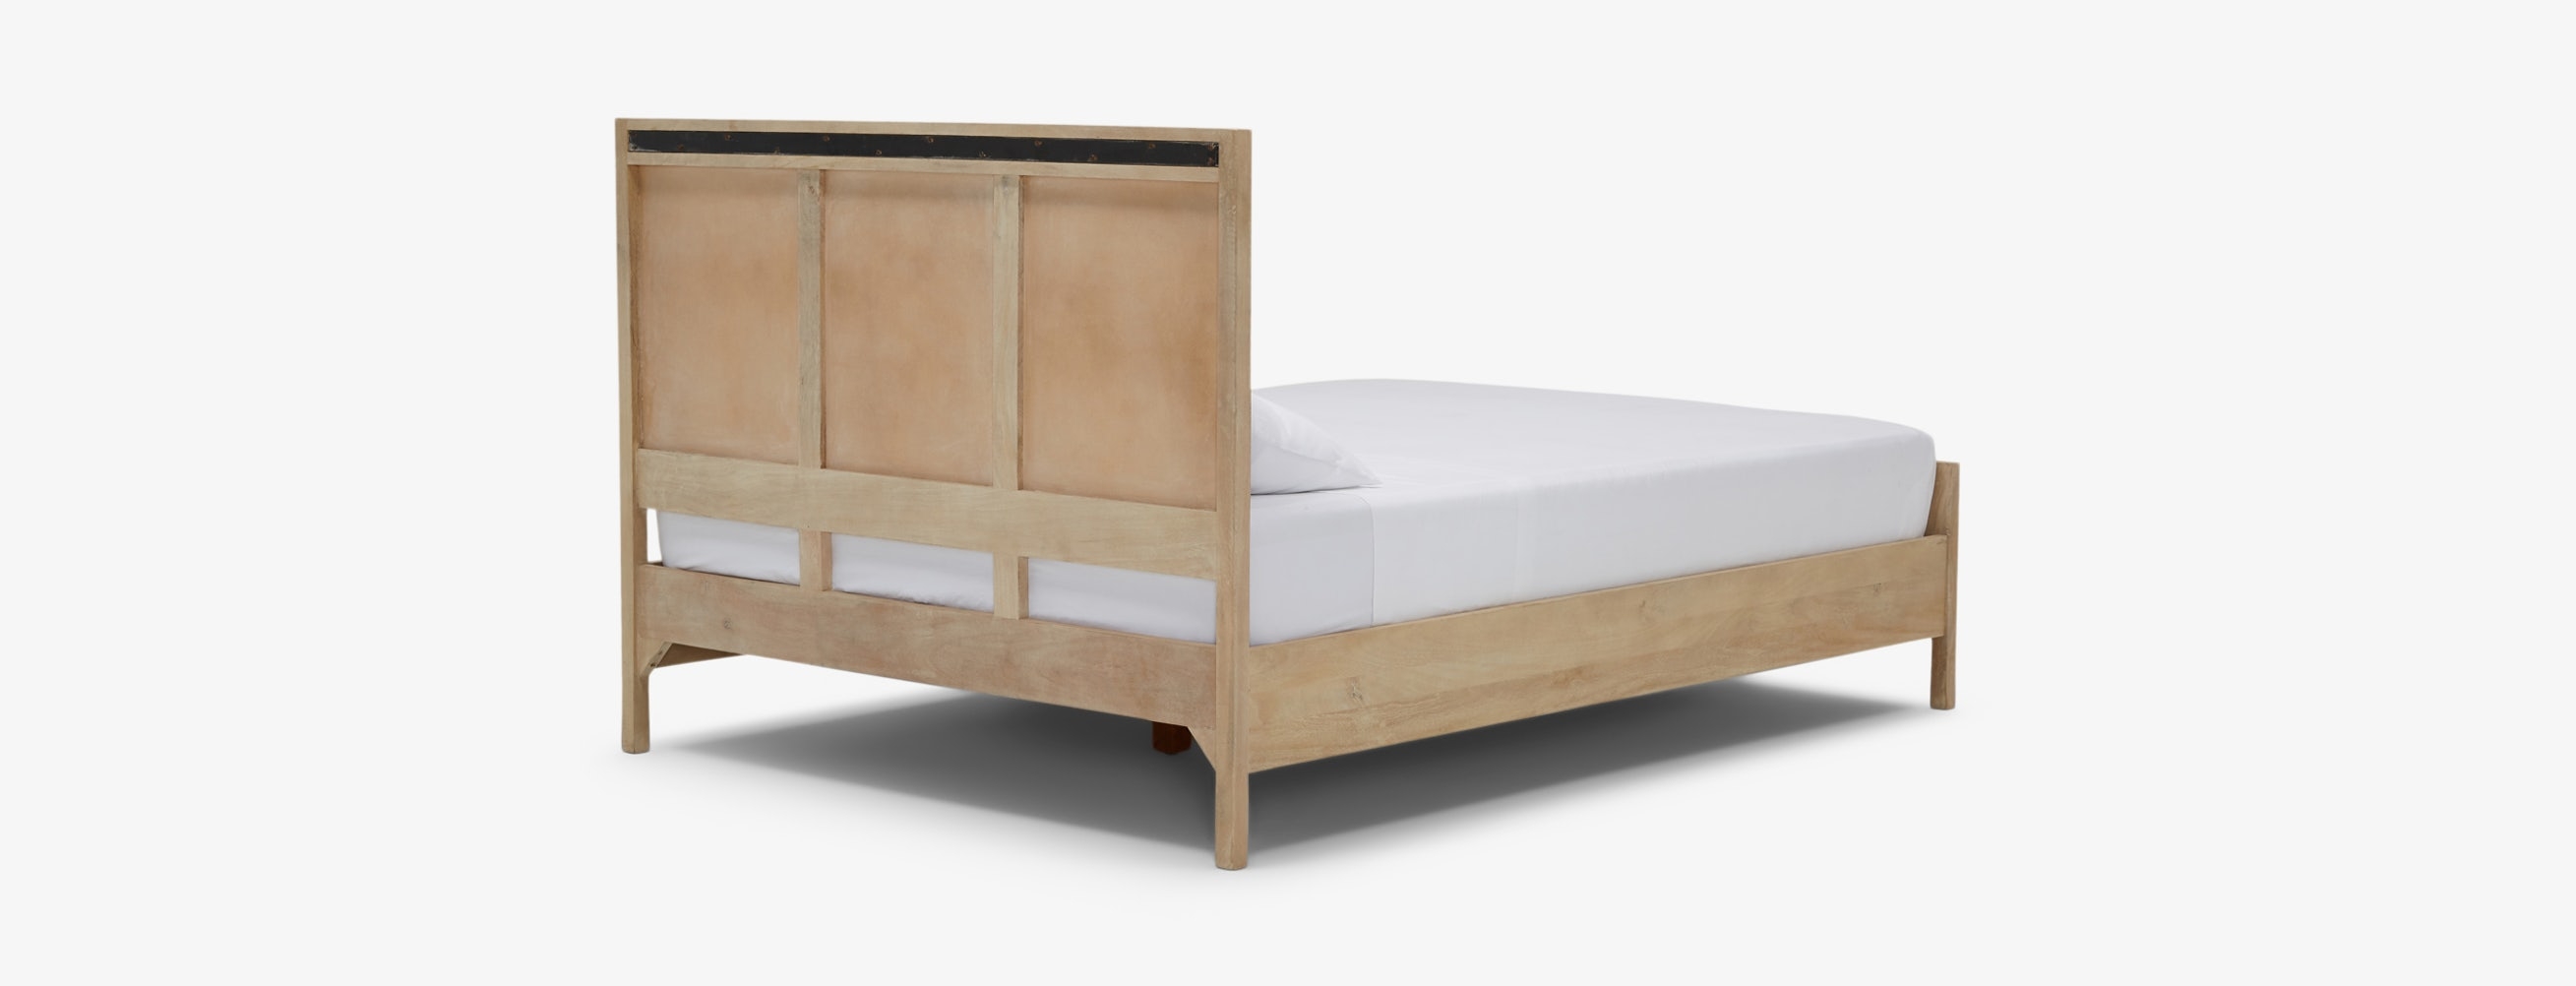 Florence Bed - Image 2